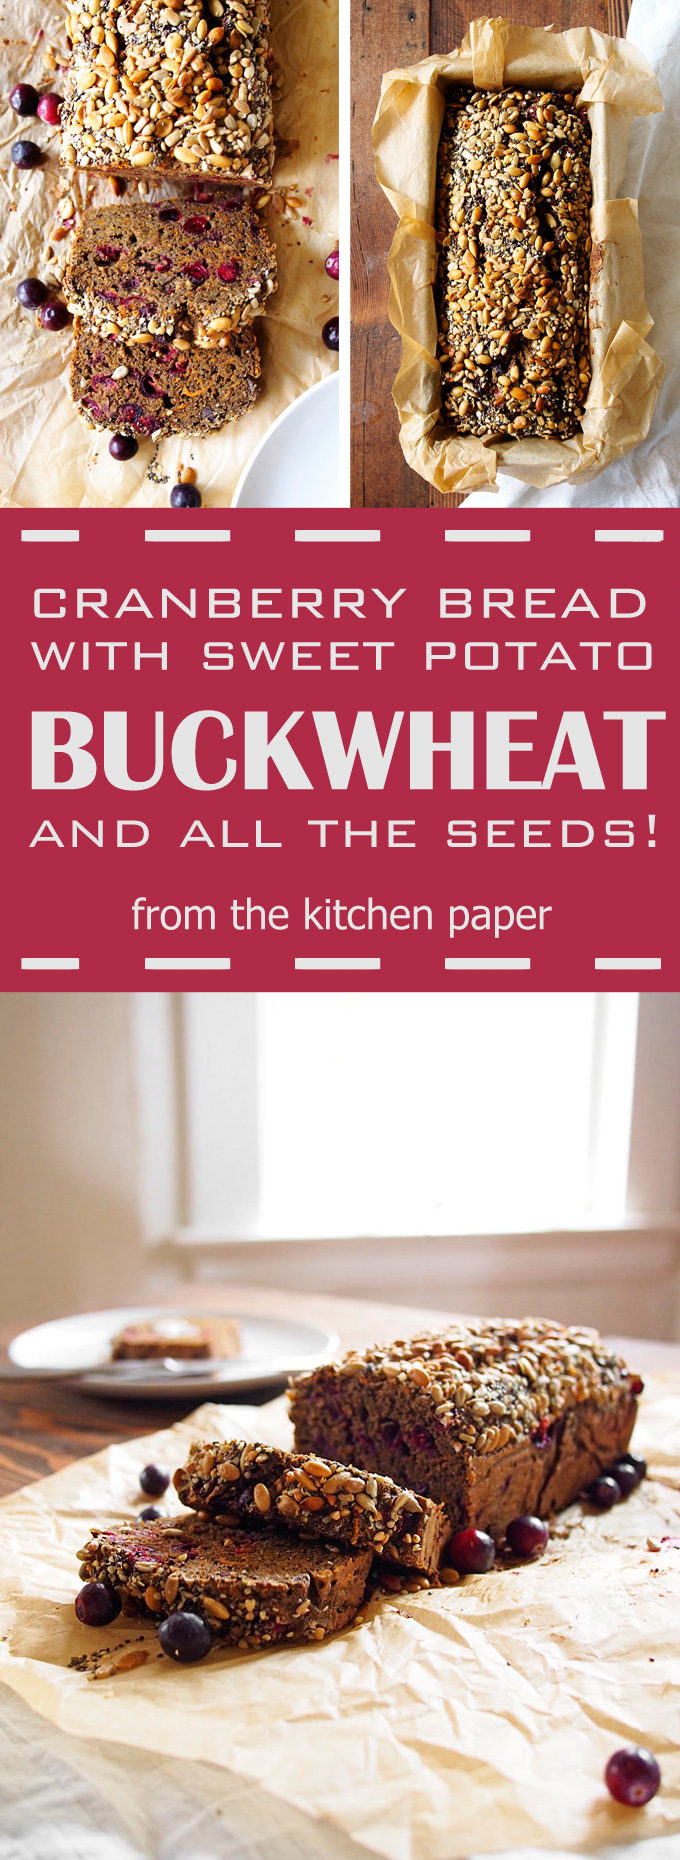 Cranberry Sweet Potato Buckwheat Seeded Bread | The Kitchen Paper